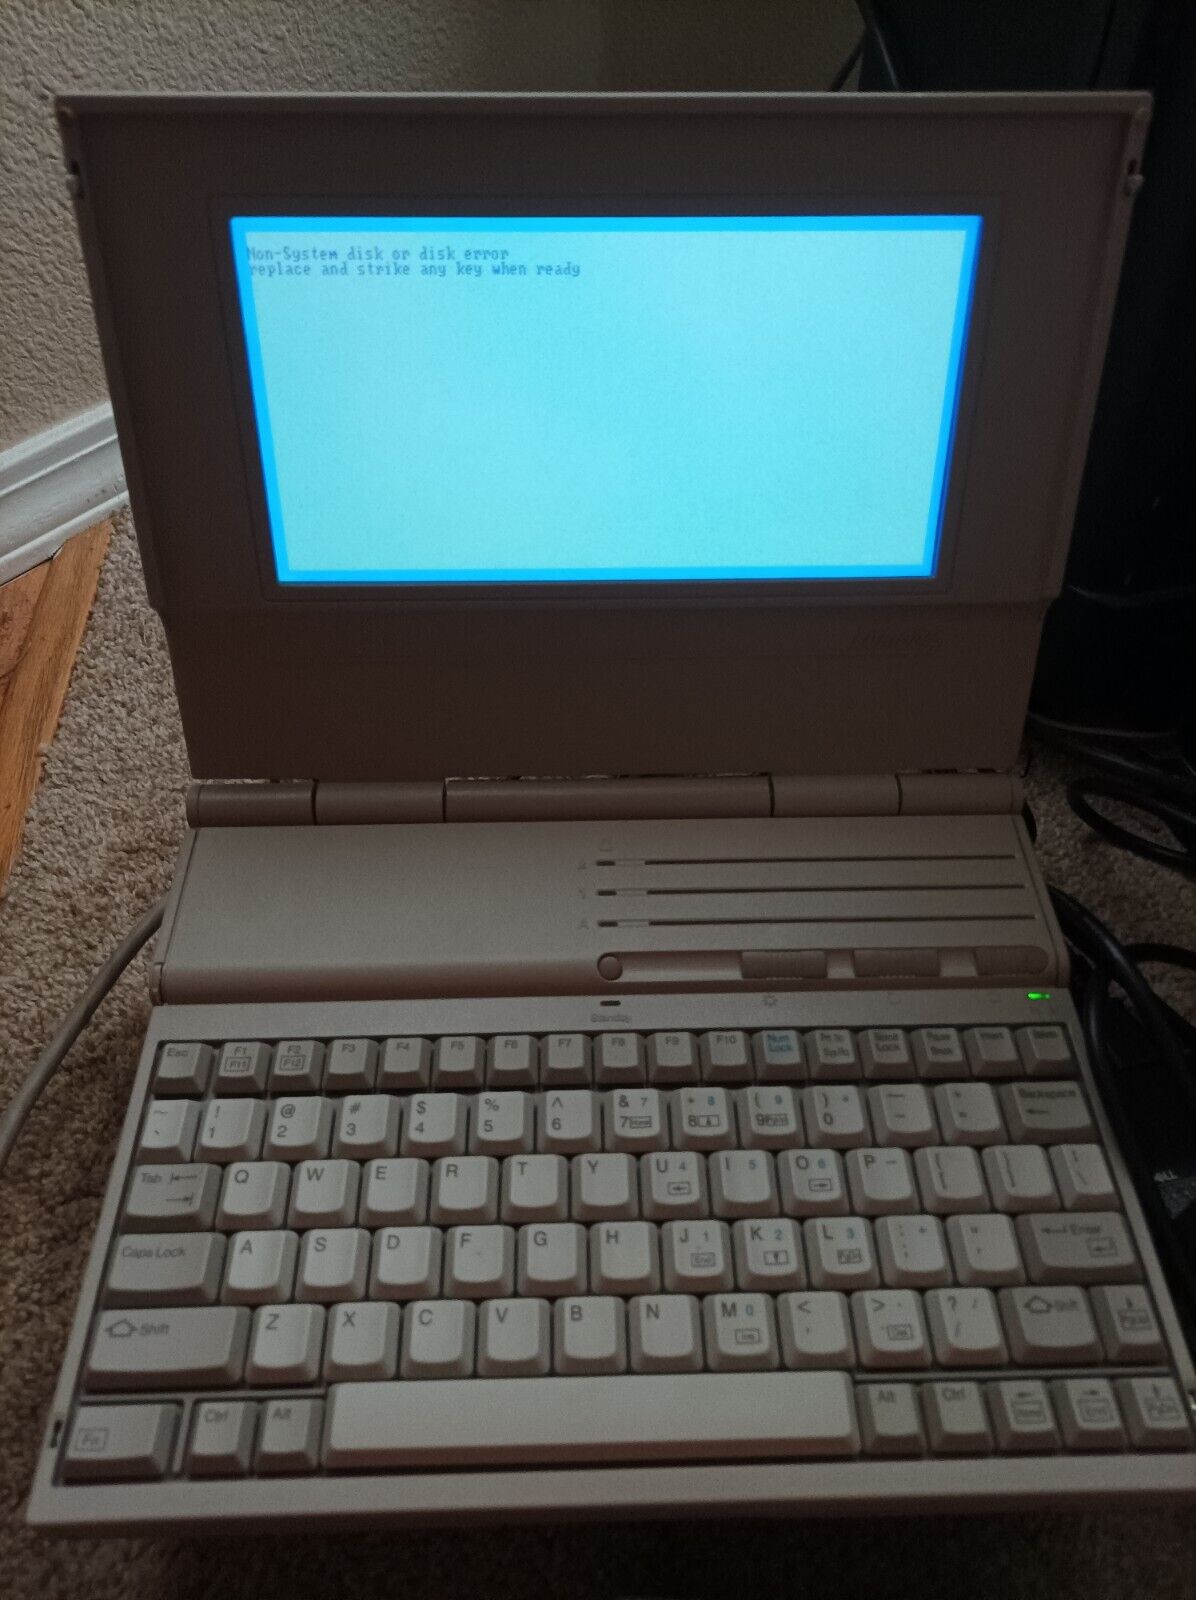 1989 Vintage Compaq LTE 286 Laptop, 640K RAM, Turns On, WITH CHARGER No OS